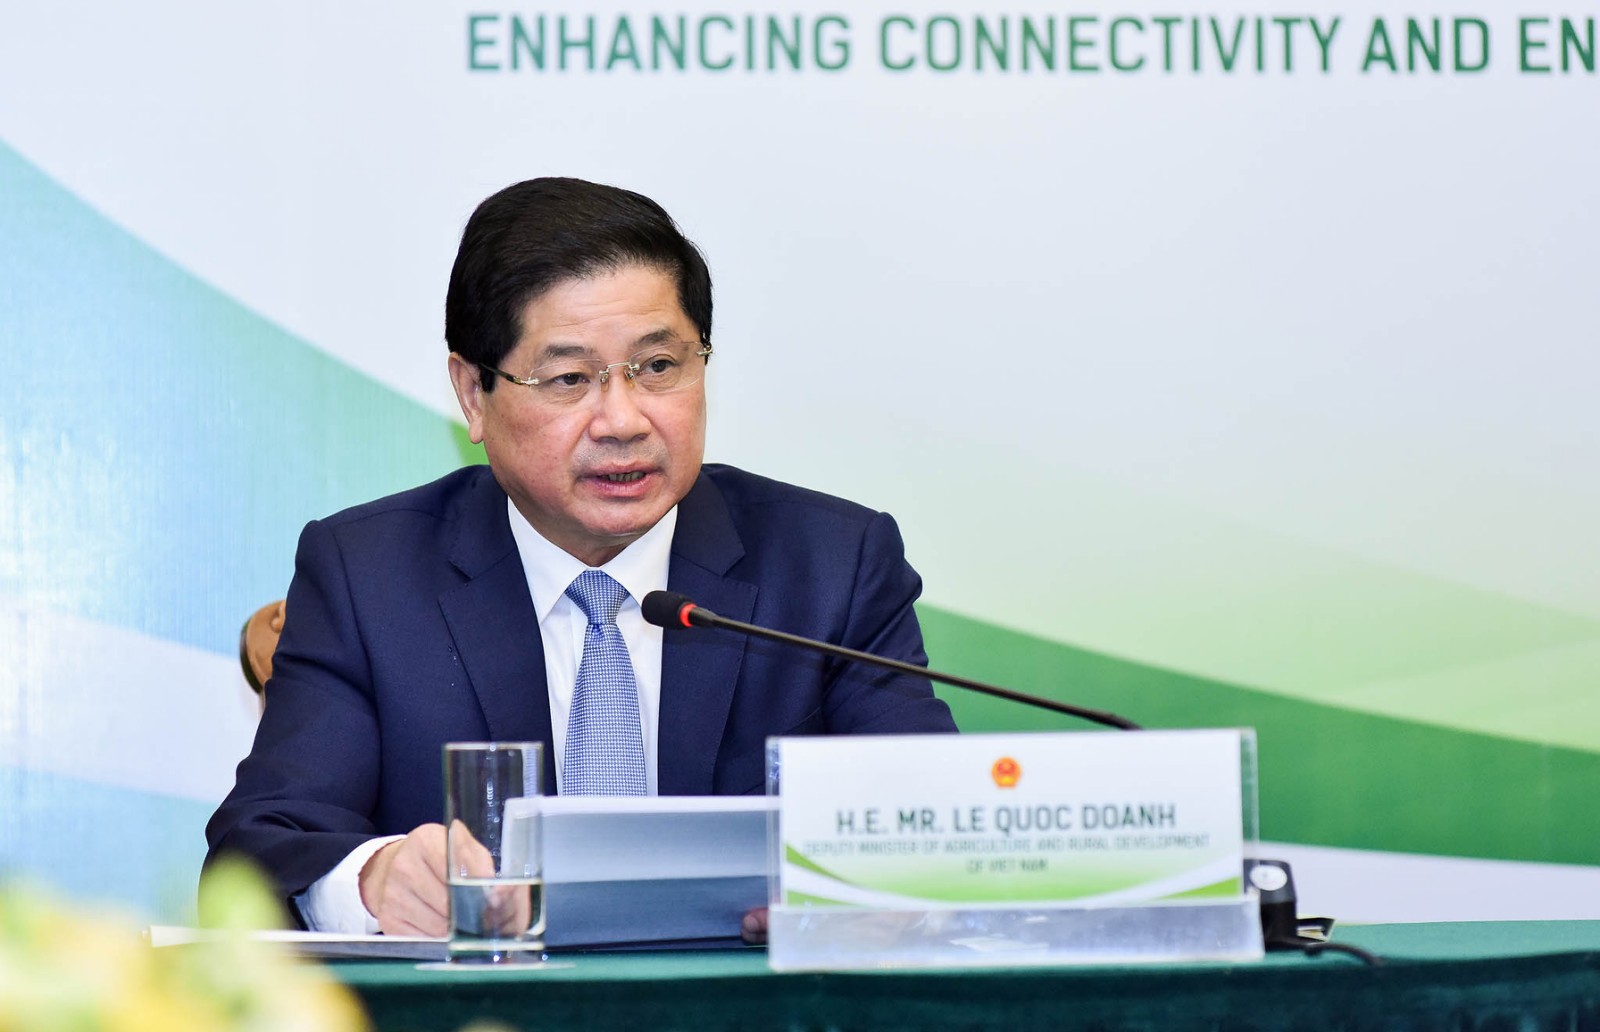 Deputy Minister of Agriculture and Rural Development Le Quoc Doanh assessed that with a population of nearly 1.3 billion people, Africa will be a potential market with plenty of room for development.